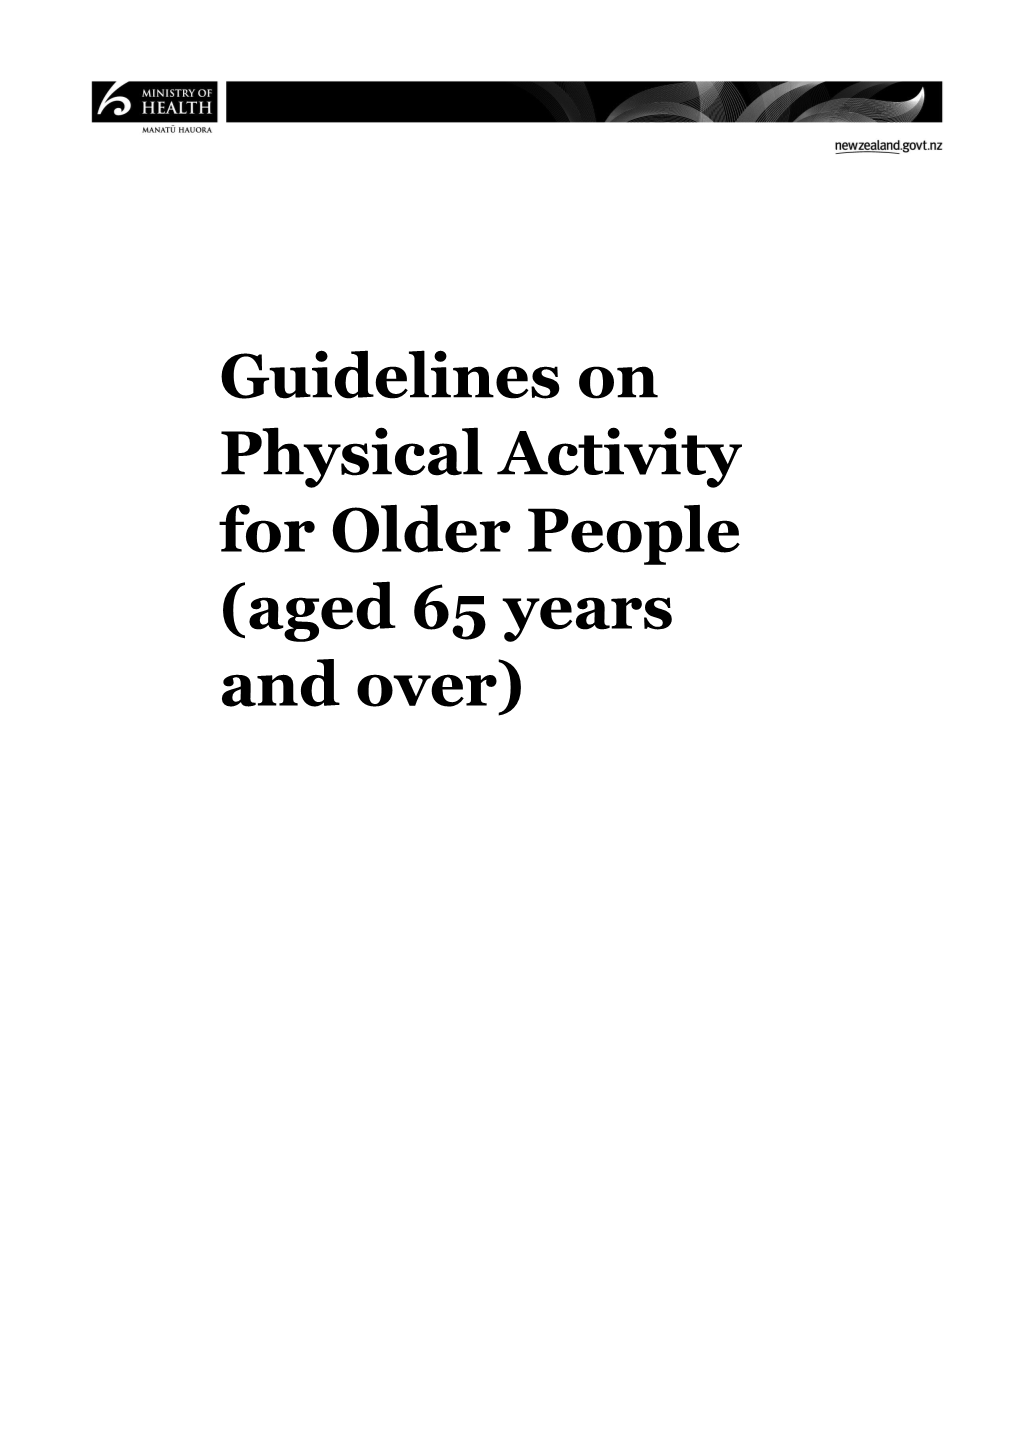 Guidelines on Physical Activity for Older People (Aged 65 Years and Over)